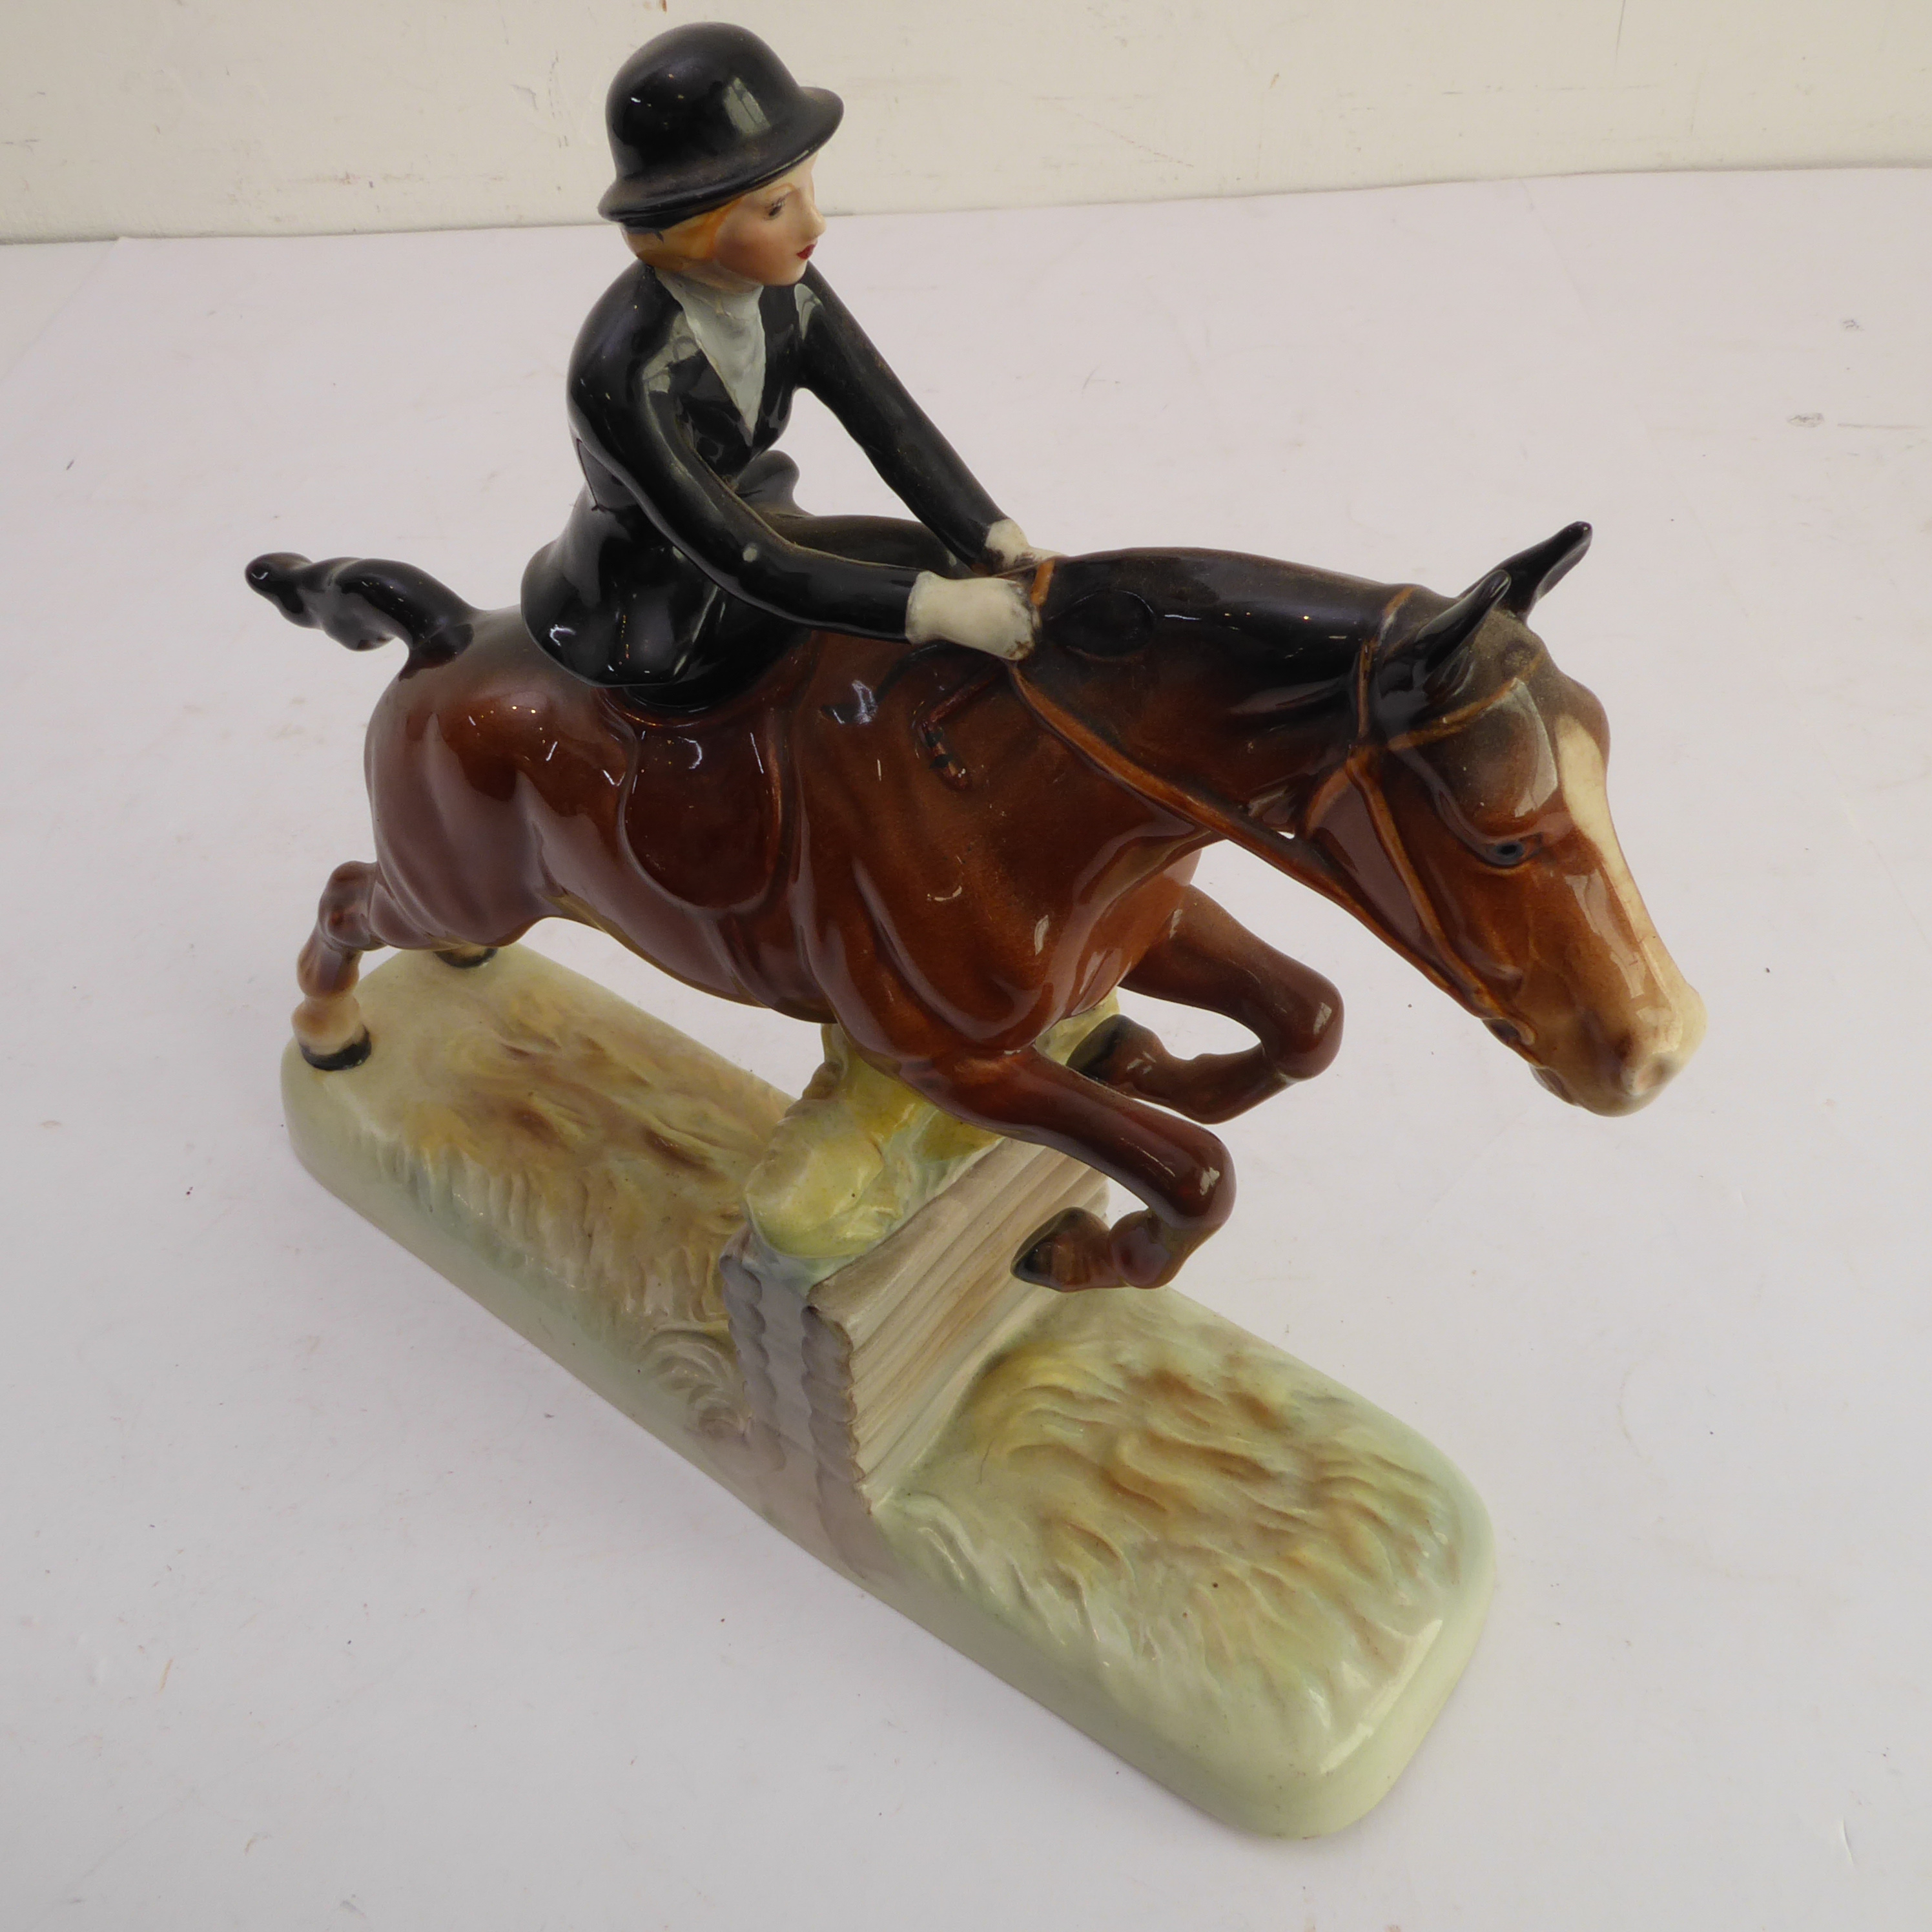 A hand-decorated Beswick model of a lady jumping a six-log fence side-saddle - printed and painted - Image 4 of 5